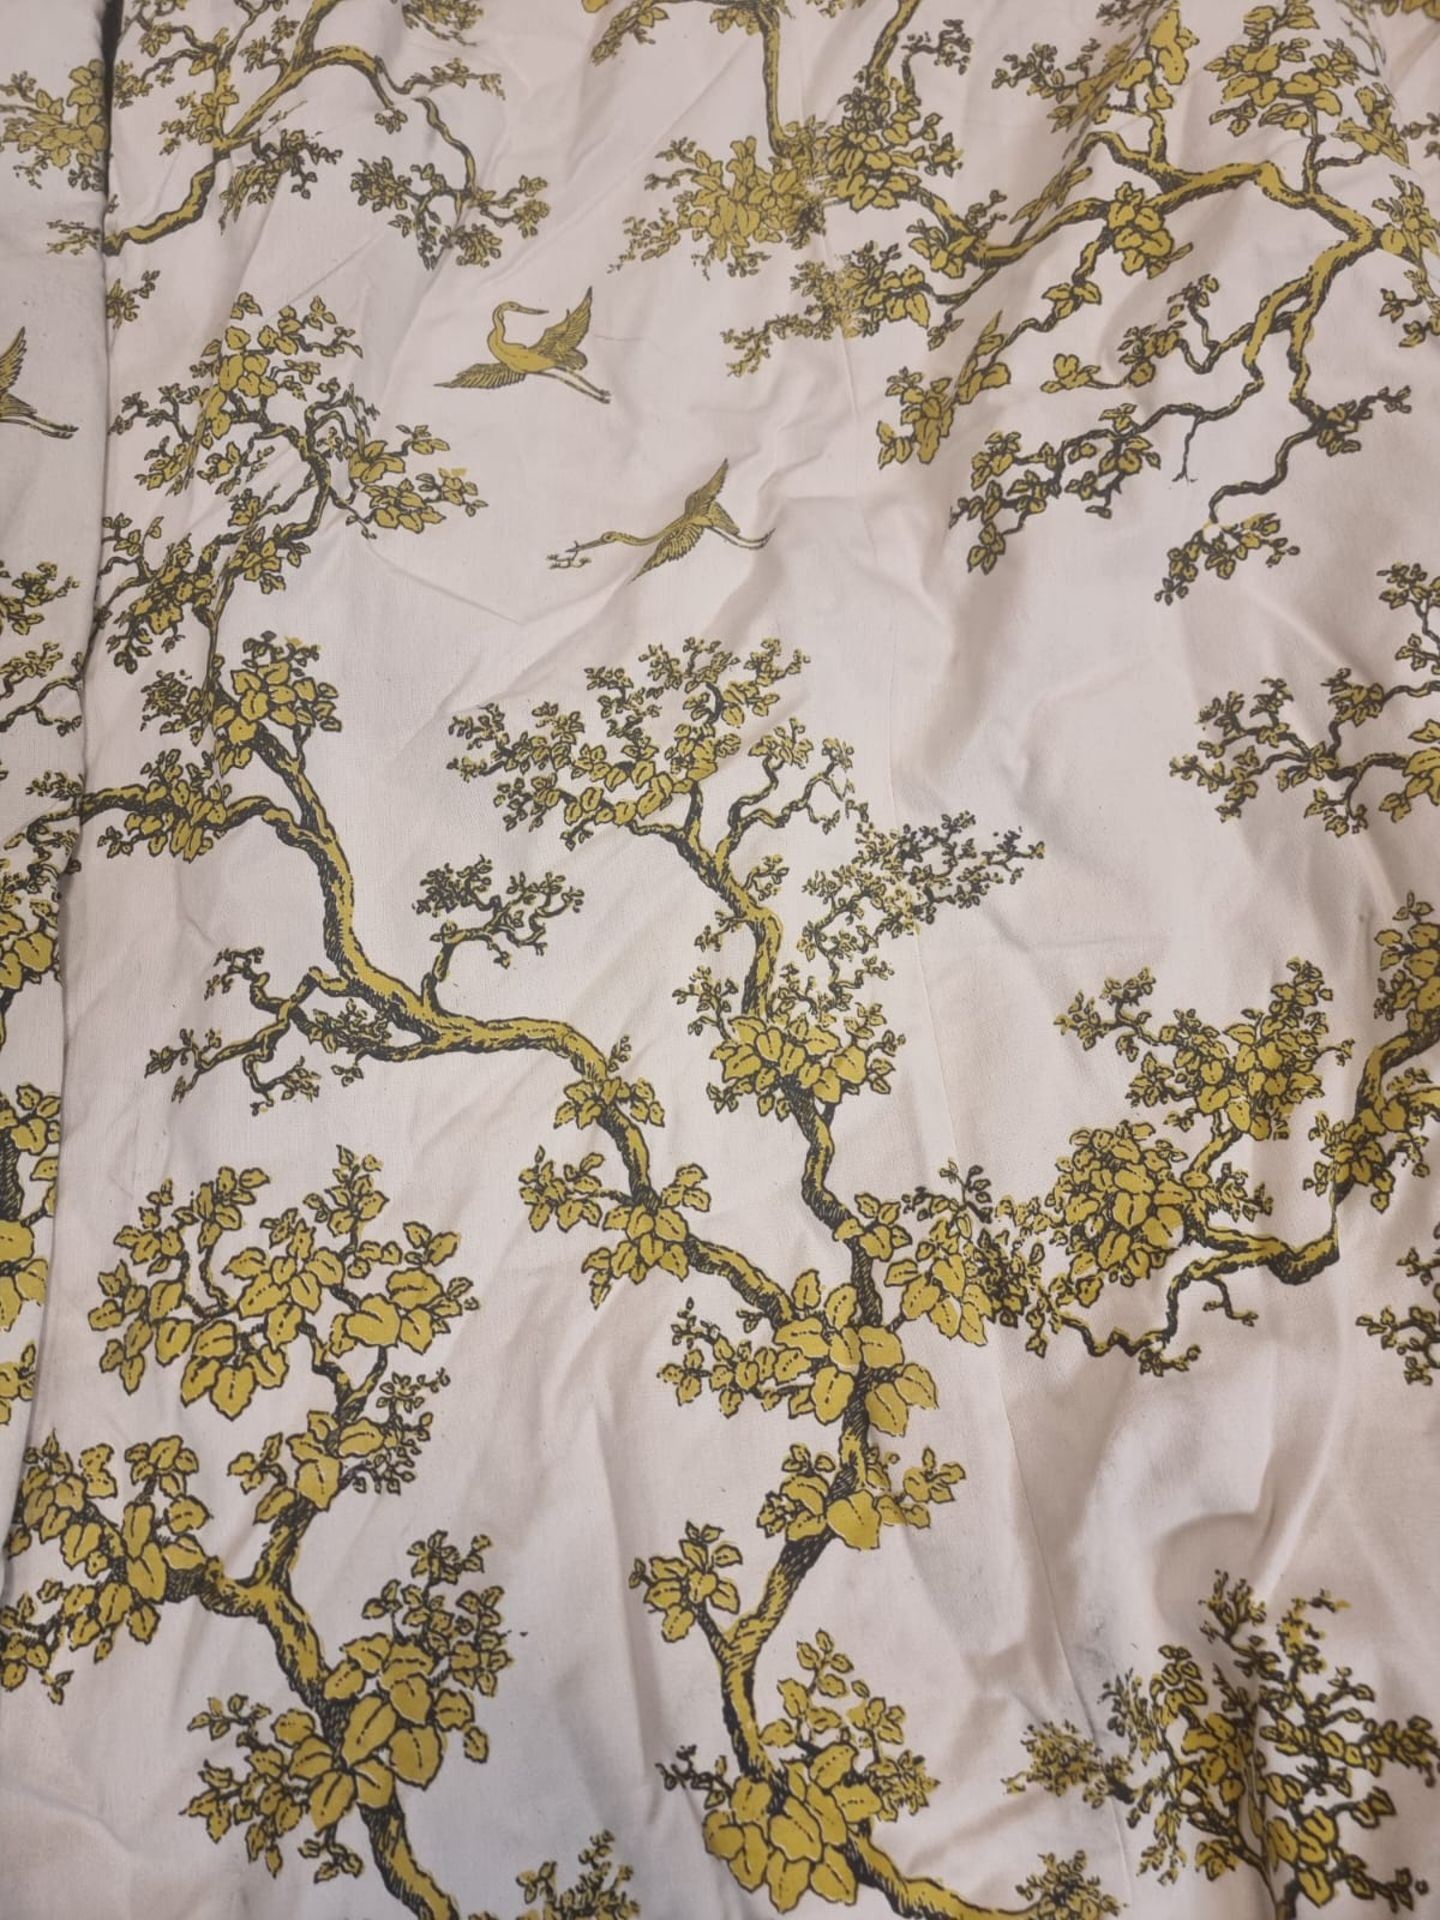 A pair of fully lined luxury cotton drapes in cream with exotic tree and birds repeating pattern - Image 3 of 6